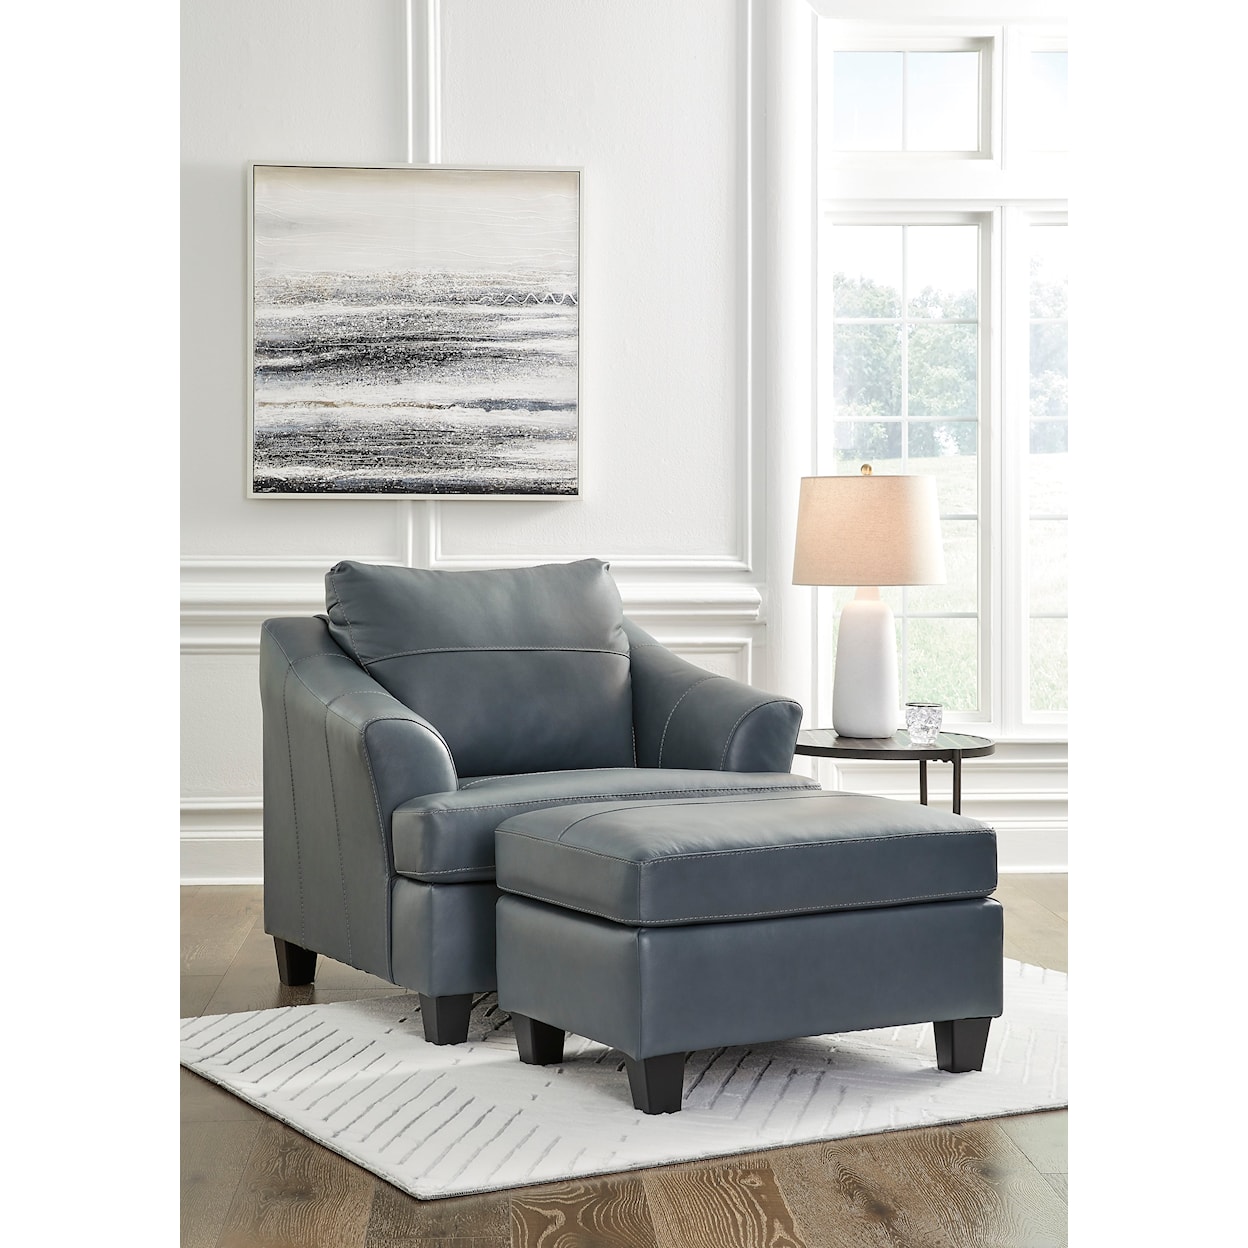 Signature Design by Ashley Genoa Oversized Chair